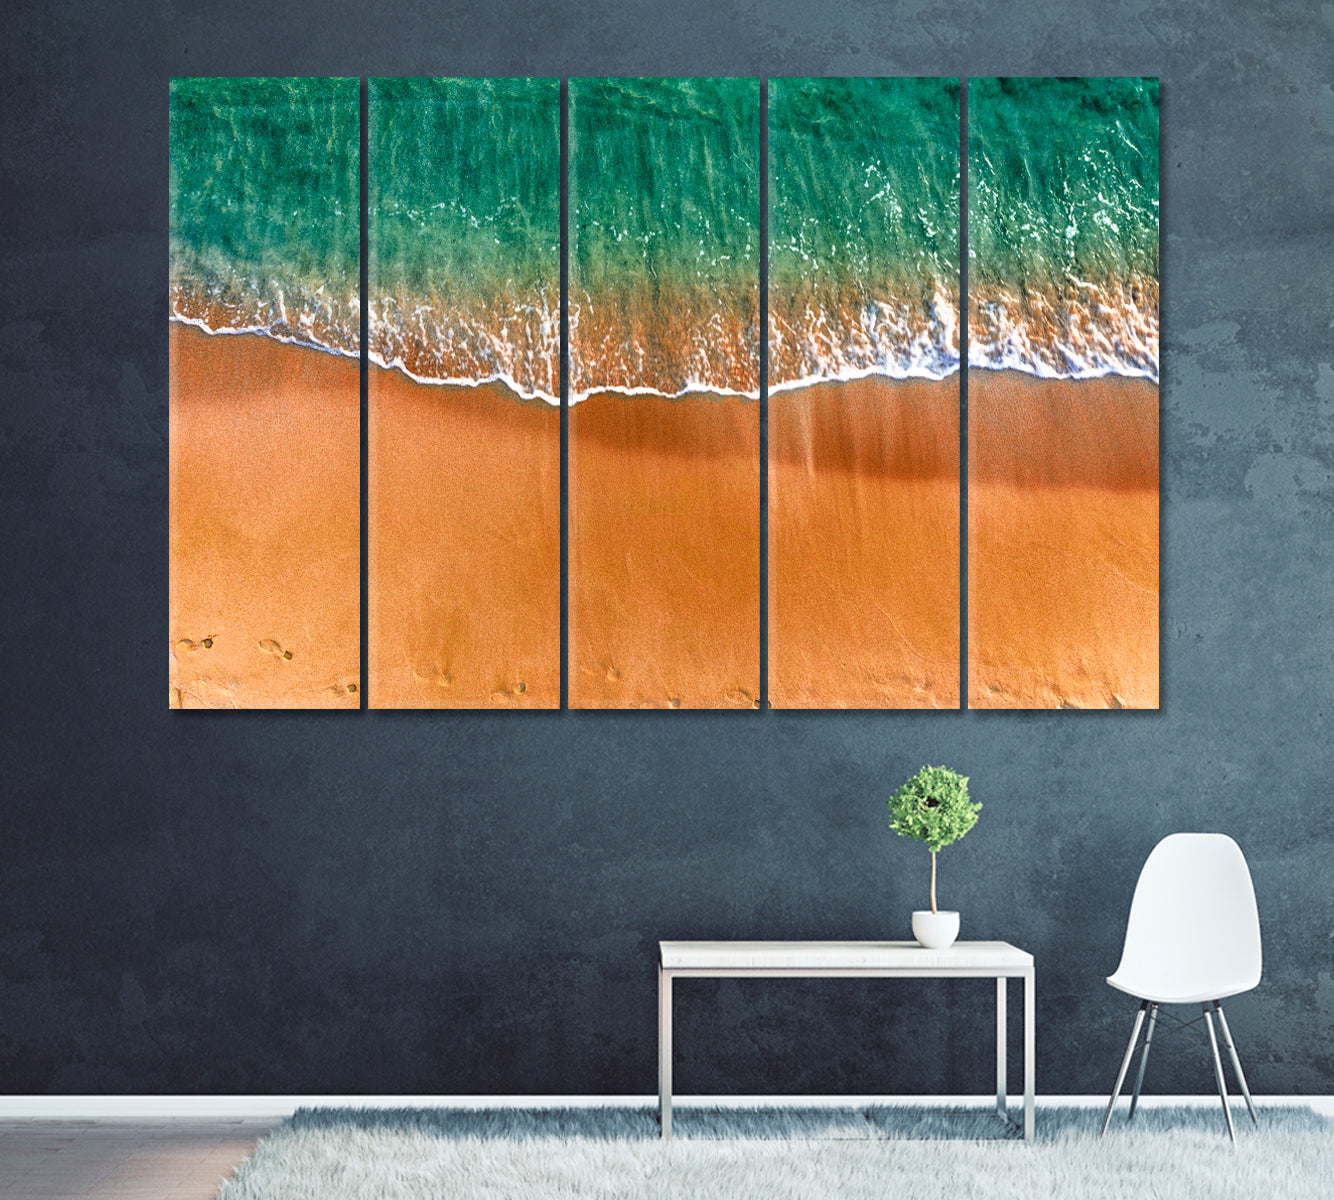 Sandy Seashore and Turquoise Sea Canvas Print ArtLexy 5 Panels 36"x24" inches 